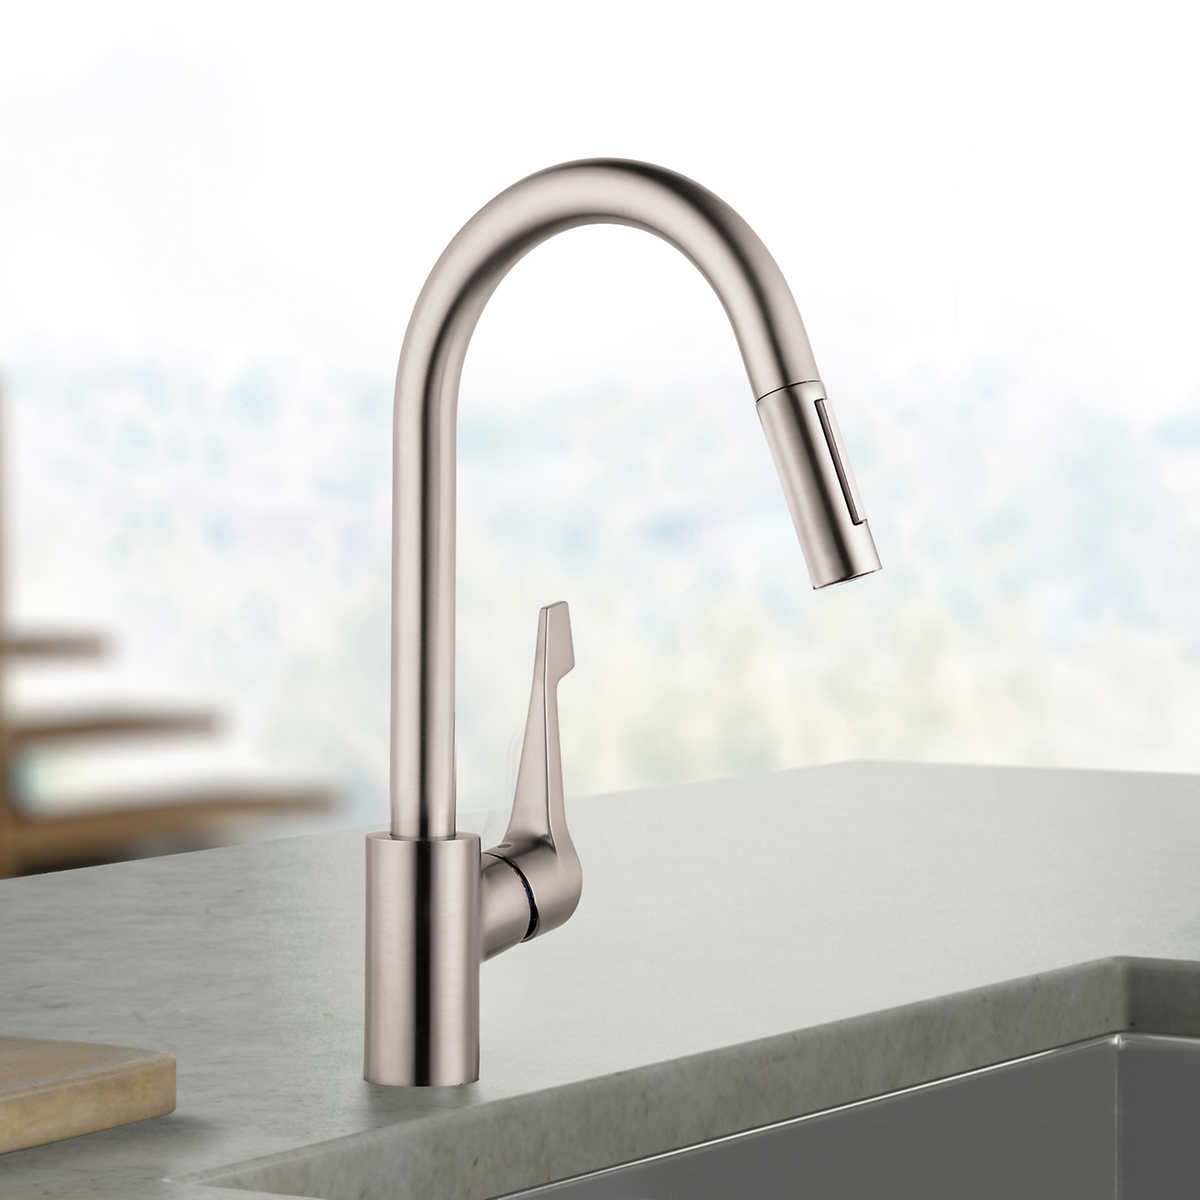 Hansgrohe Cento Kitchen Faucet In Steel Optik Chrome Finish